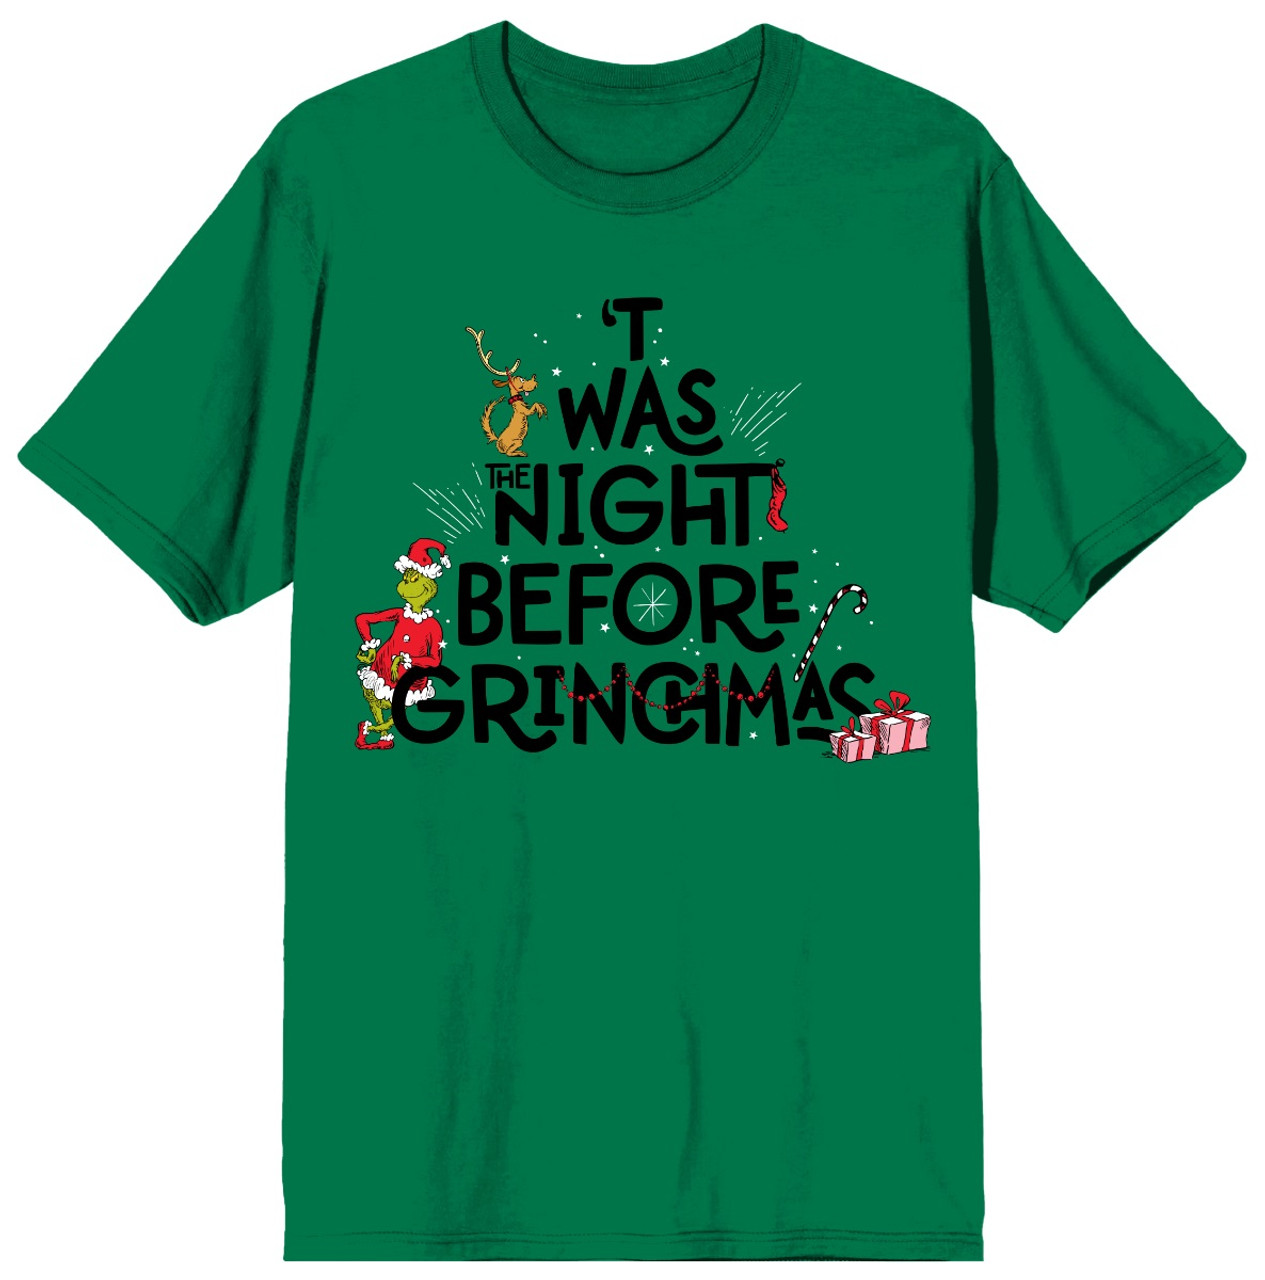 https://cdn11.bigcommerce.com/s-c9a80/images/stencil/1280x1280/products/12339/41725/Twas_the_Night_Before_Grinchmas_Tee__38326.1637592026.jpg?c=2